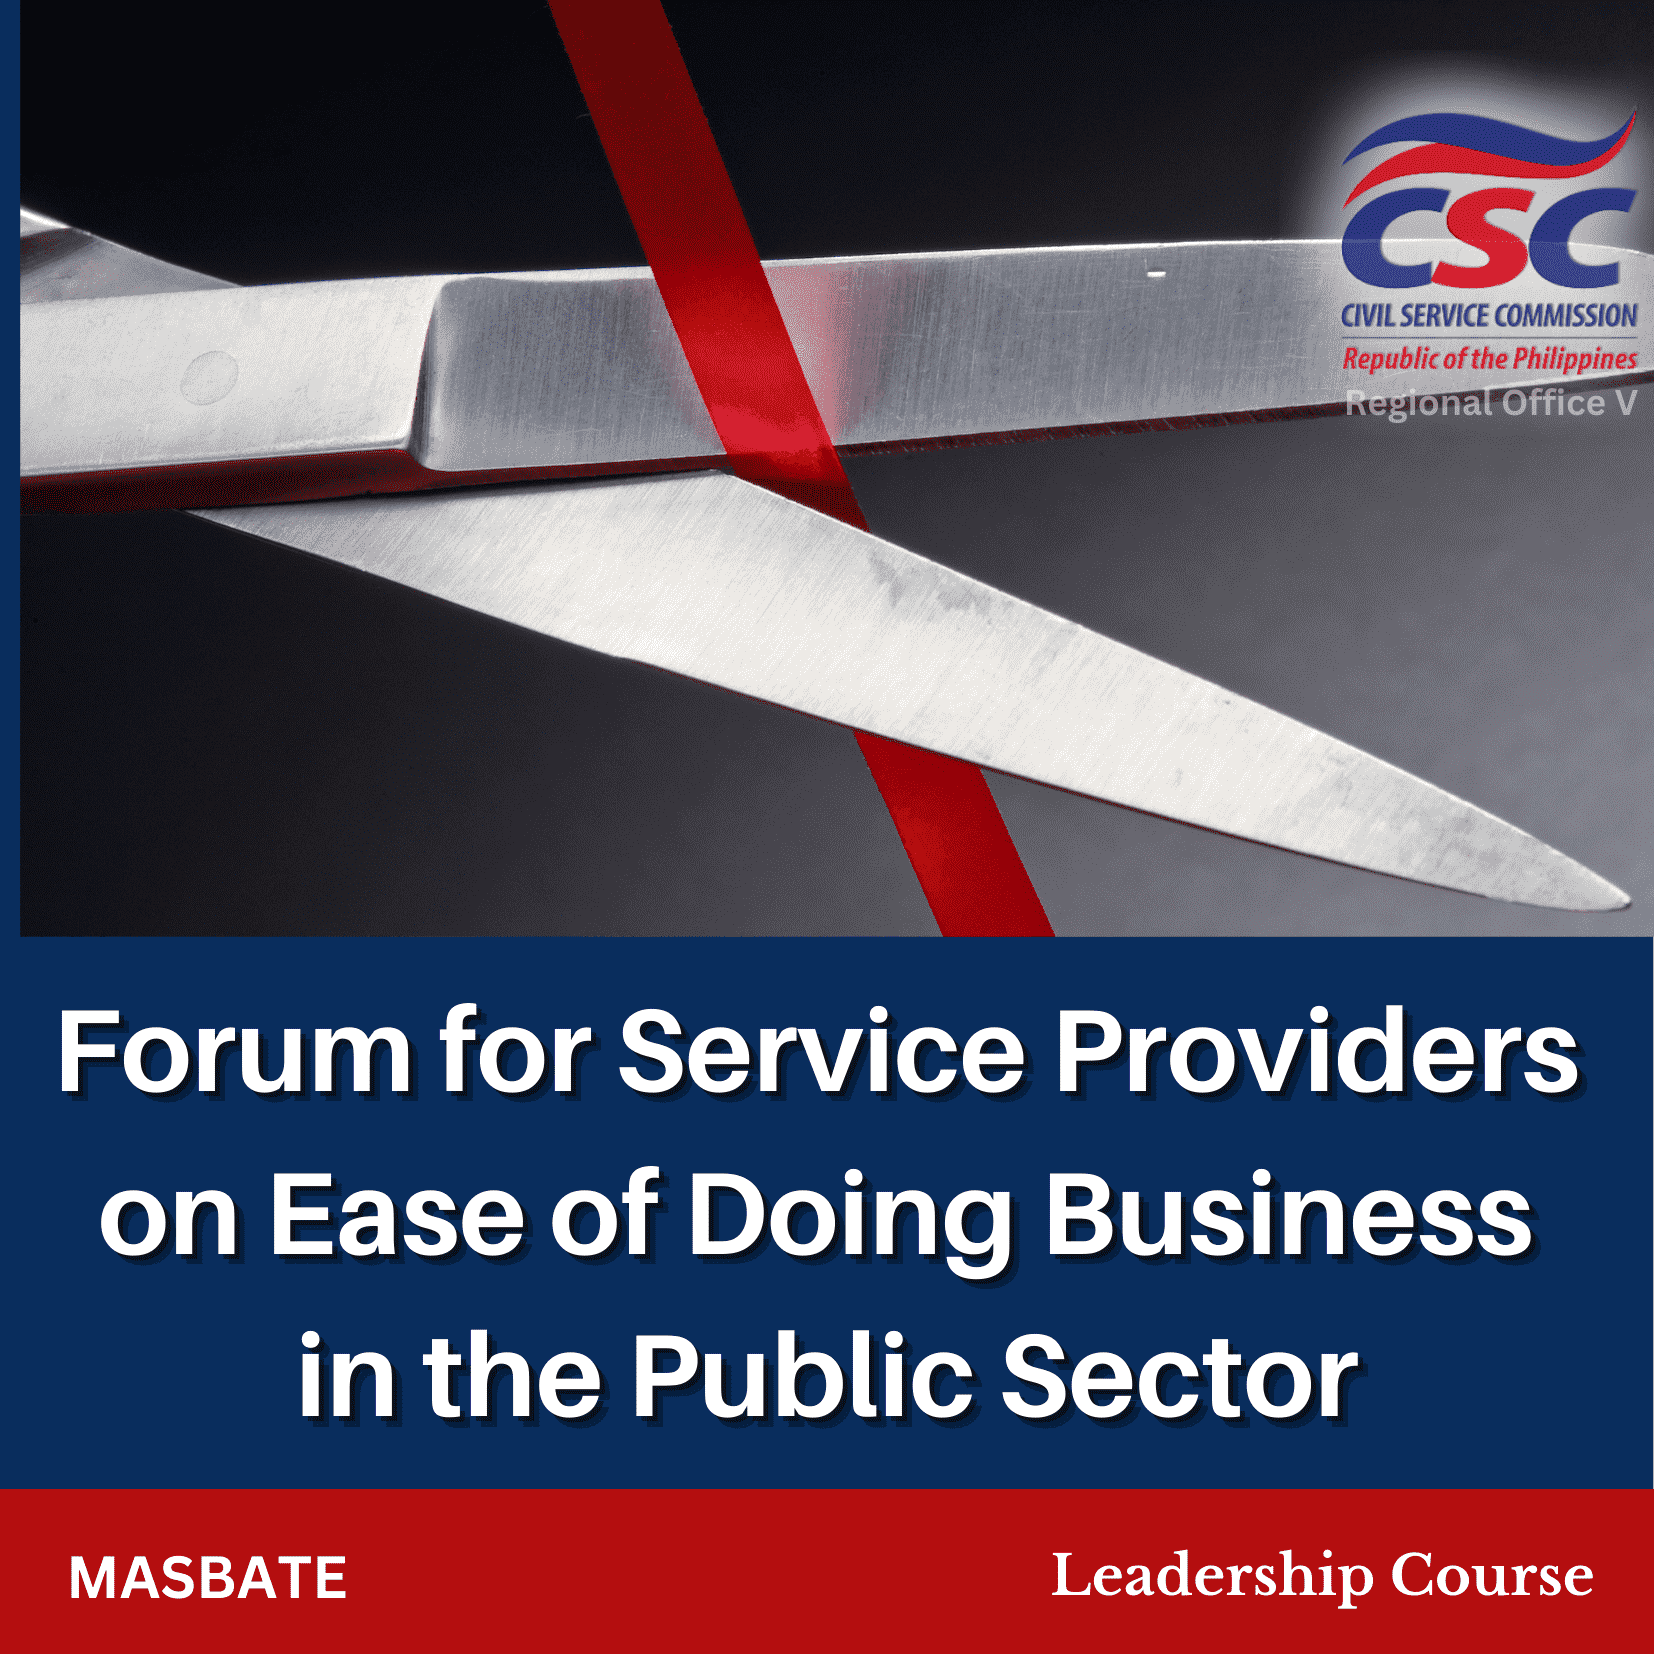 Ease of Doing Business in the Public Sector for Service Providers (Masbate)